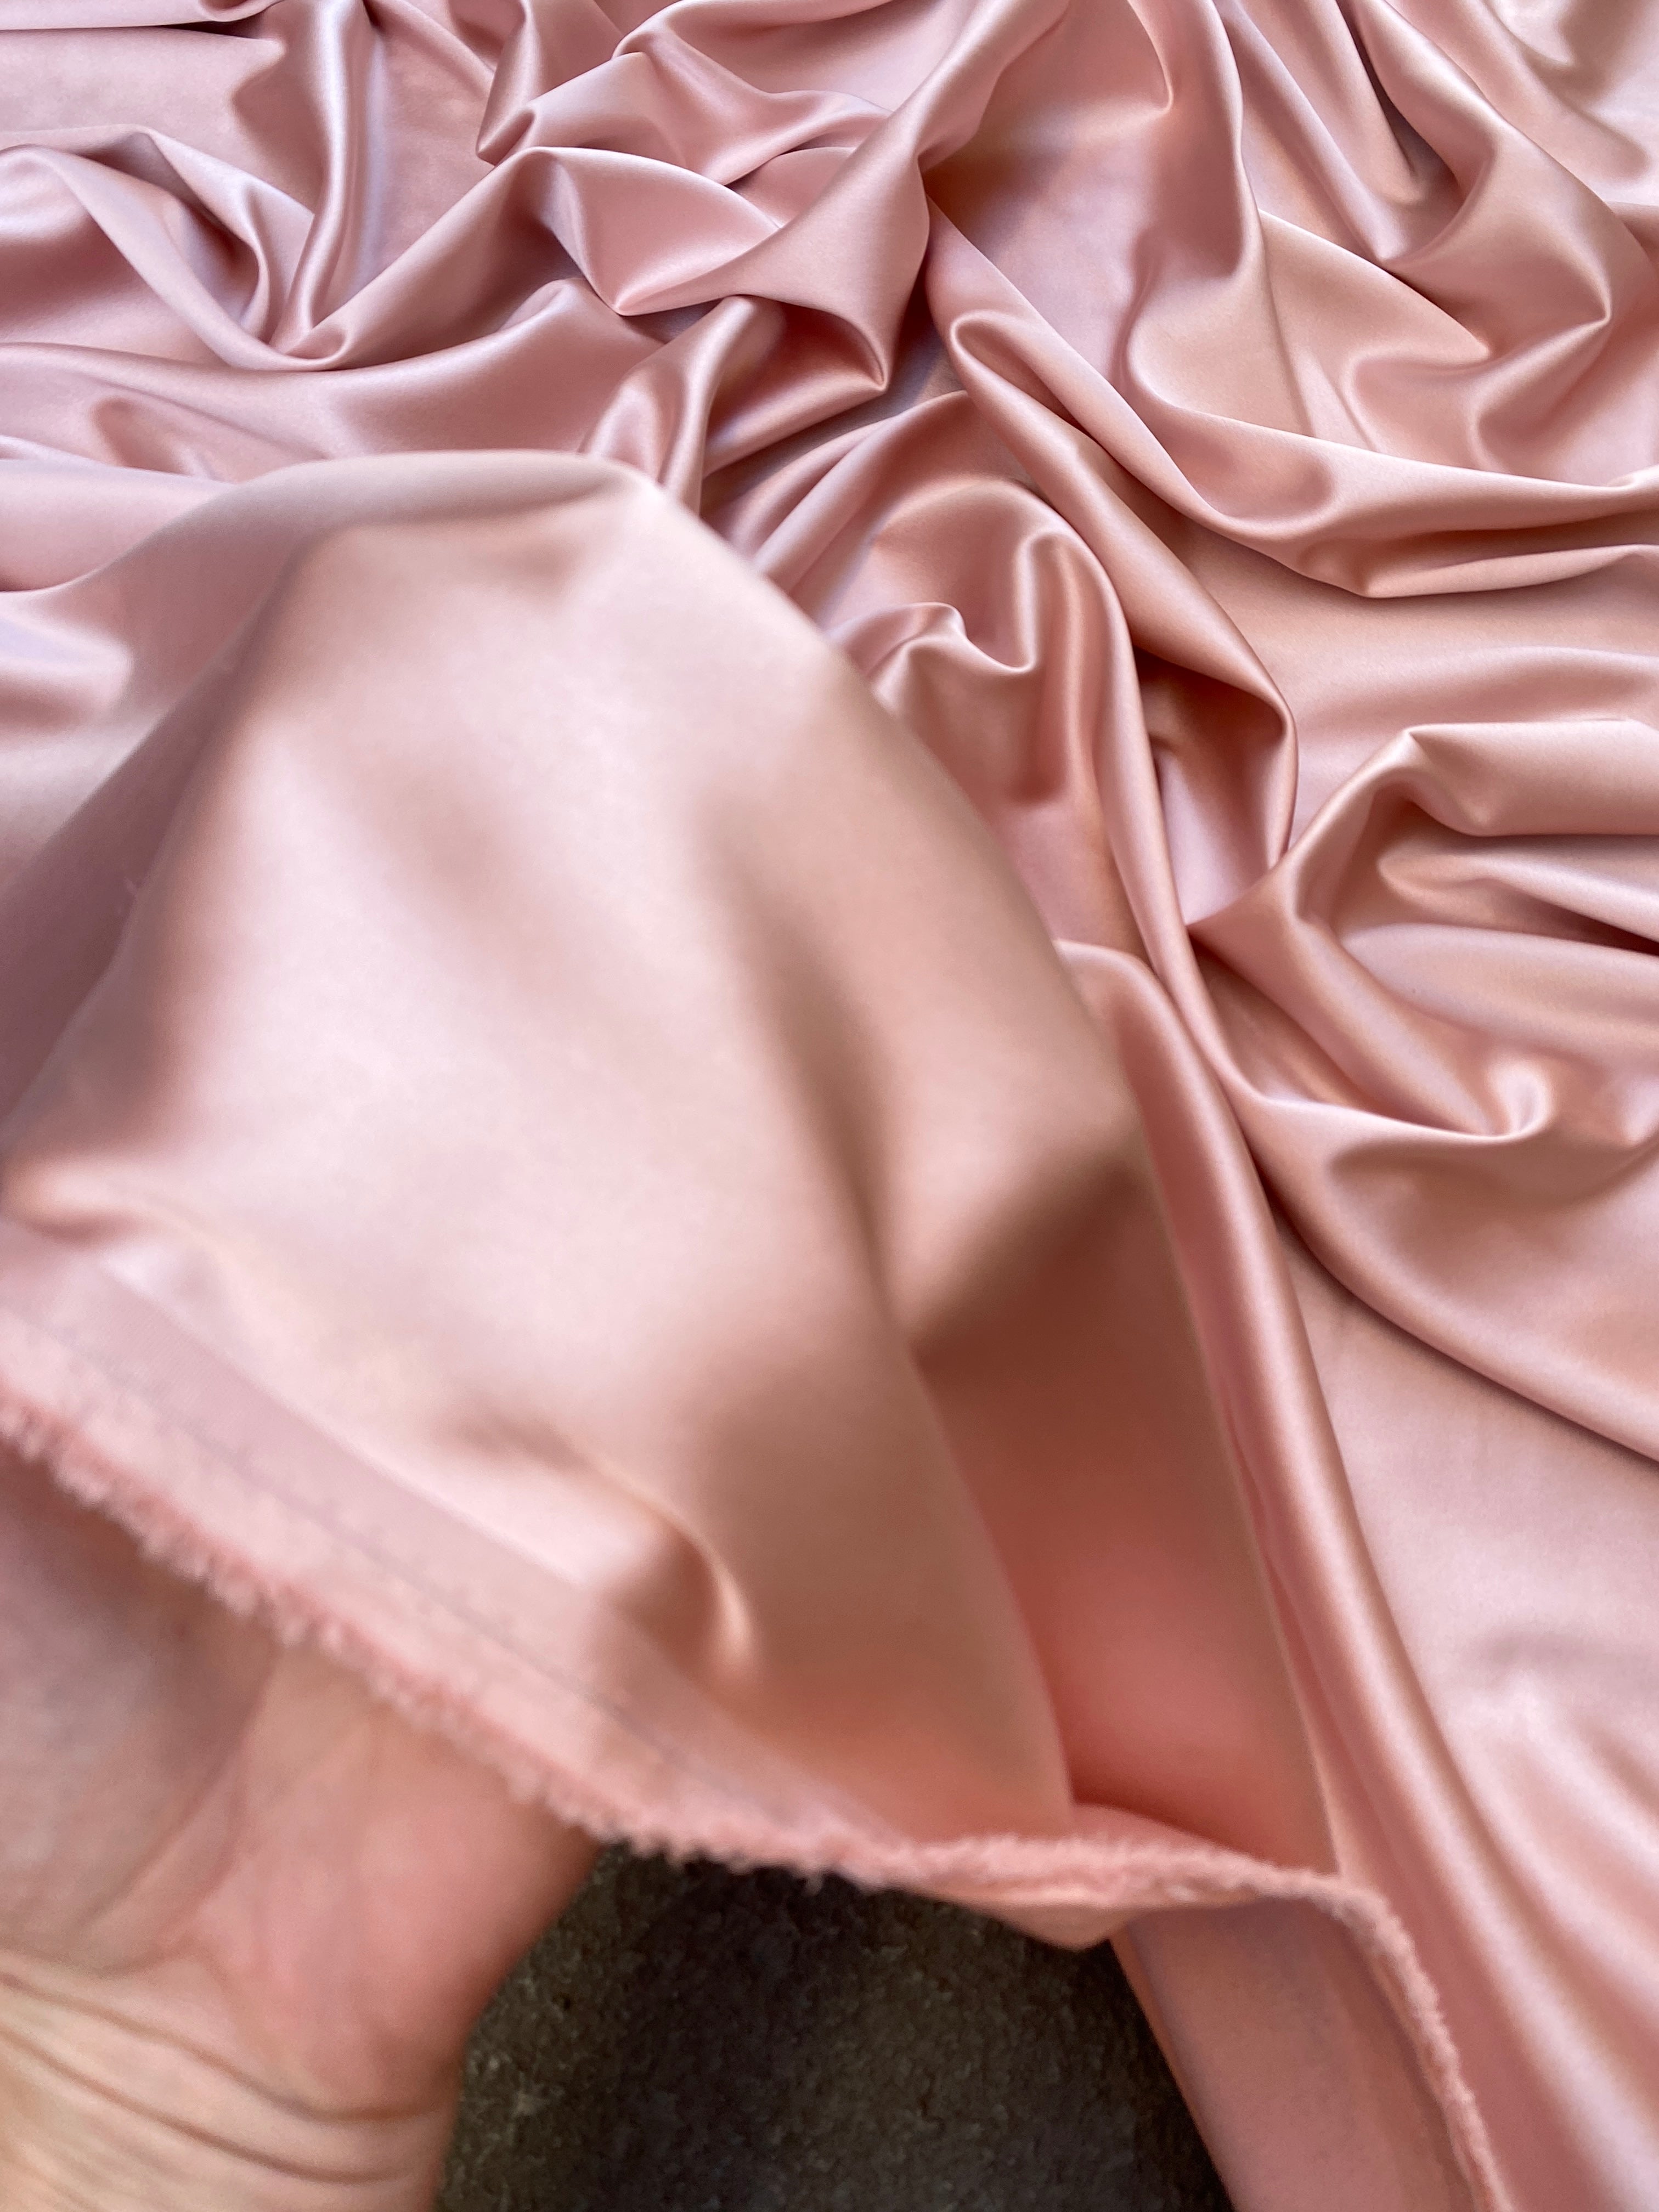 blush stretch crepe back satin, pink stretch crepe back satin, rose pink stretch crepe back satin, premium stretch crepe back satin, satin for bride, satin for woman, satin in low price, cheap satin, satin on sale